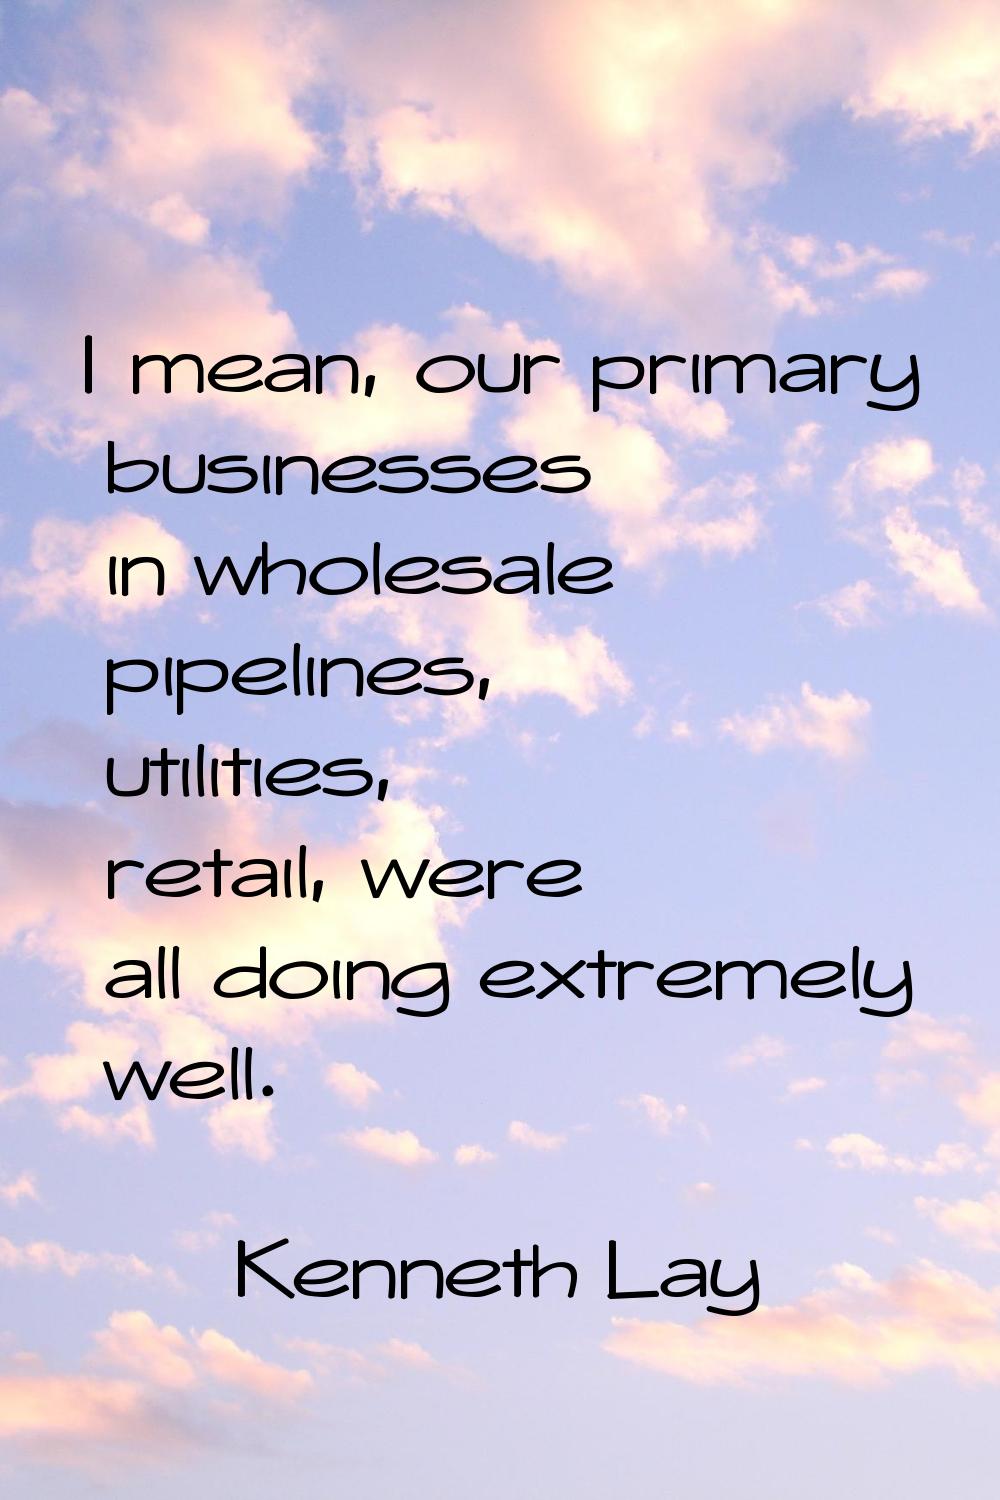 I mean, our primary businesses in wholesale pipelines, utilities, retail, were all doing extremely 